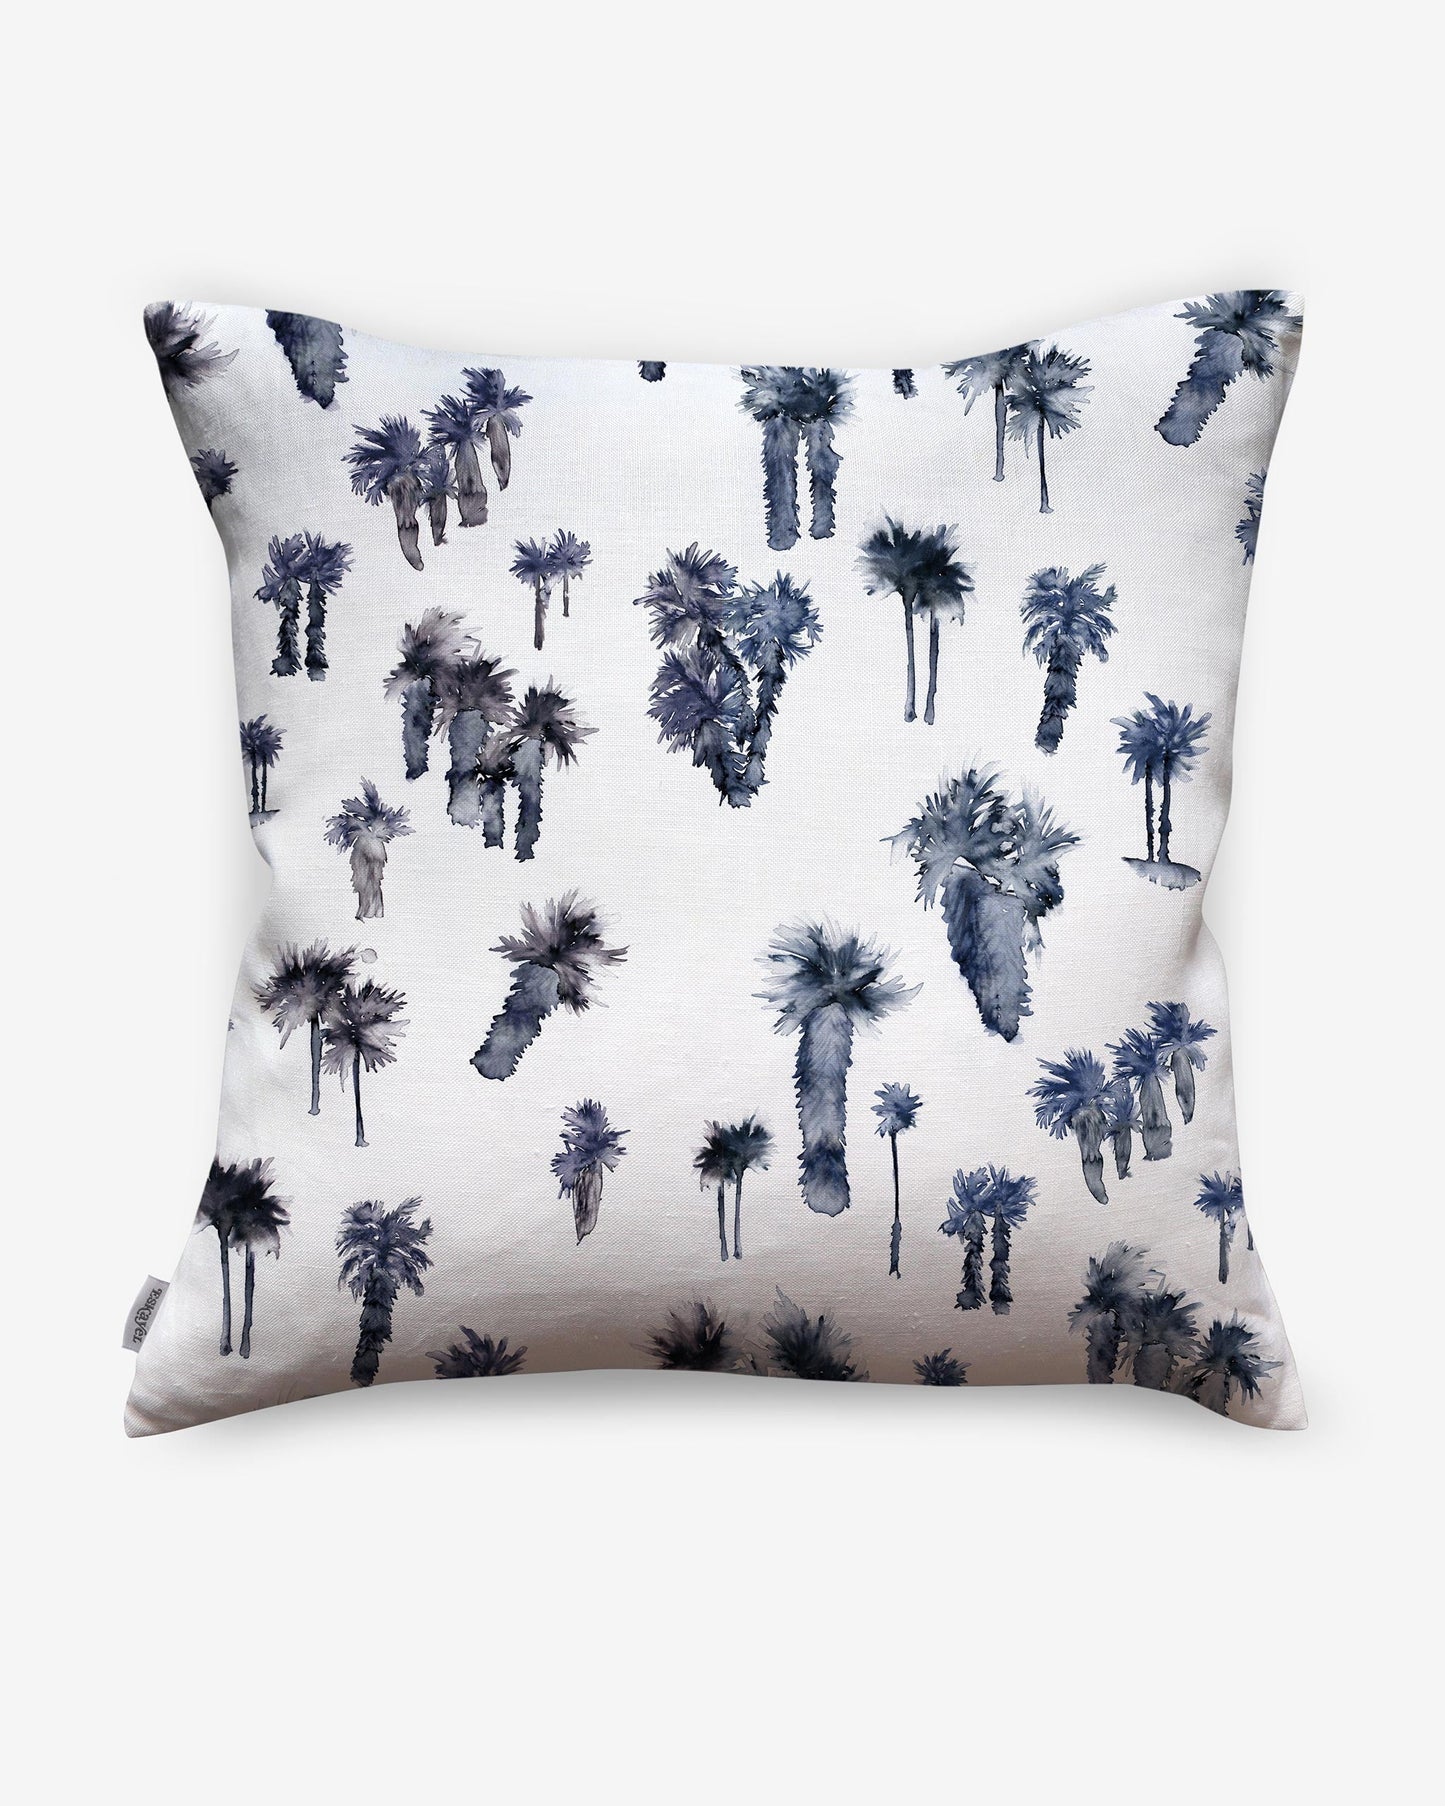 A luxury Perfect Palm Pillow Midnight with palm trees in a watercolor style